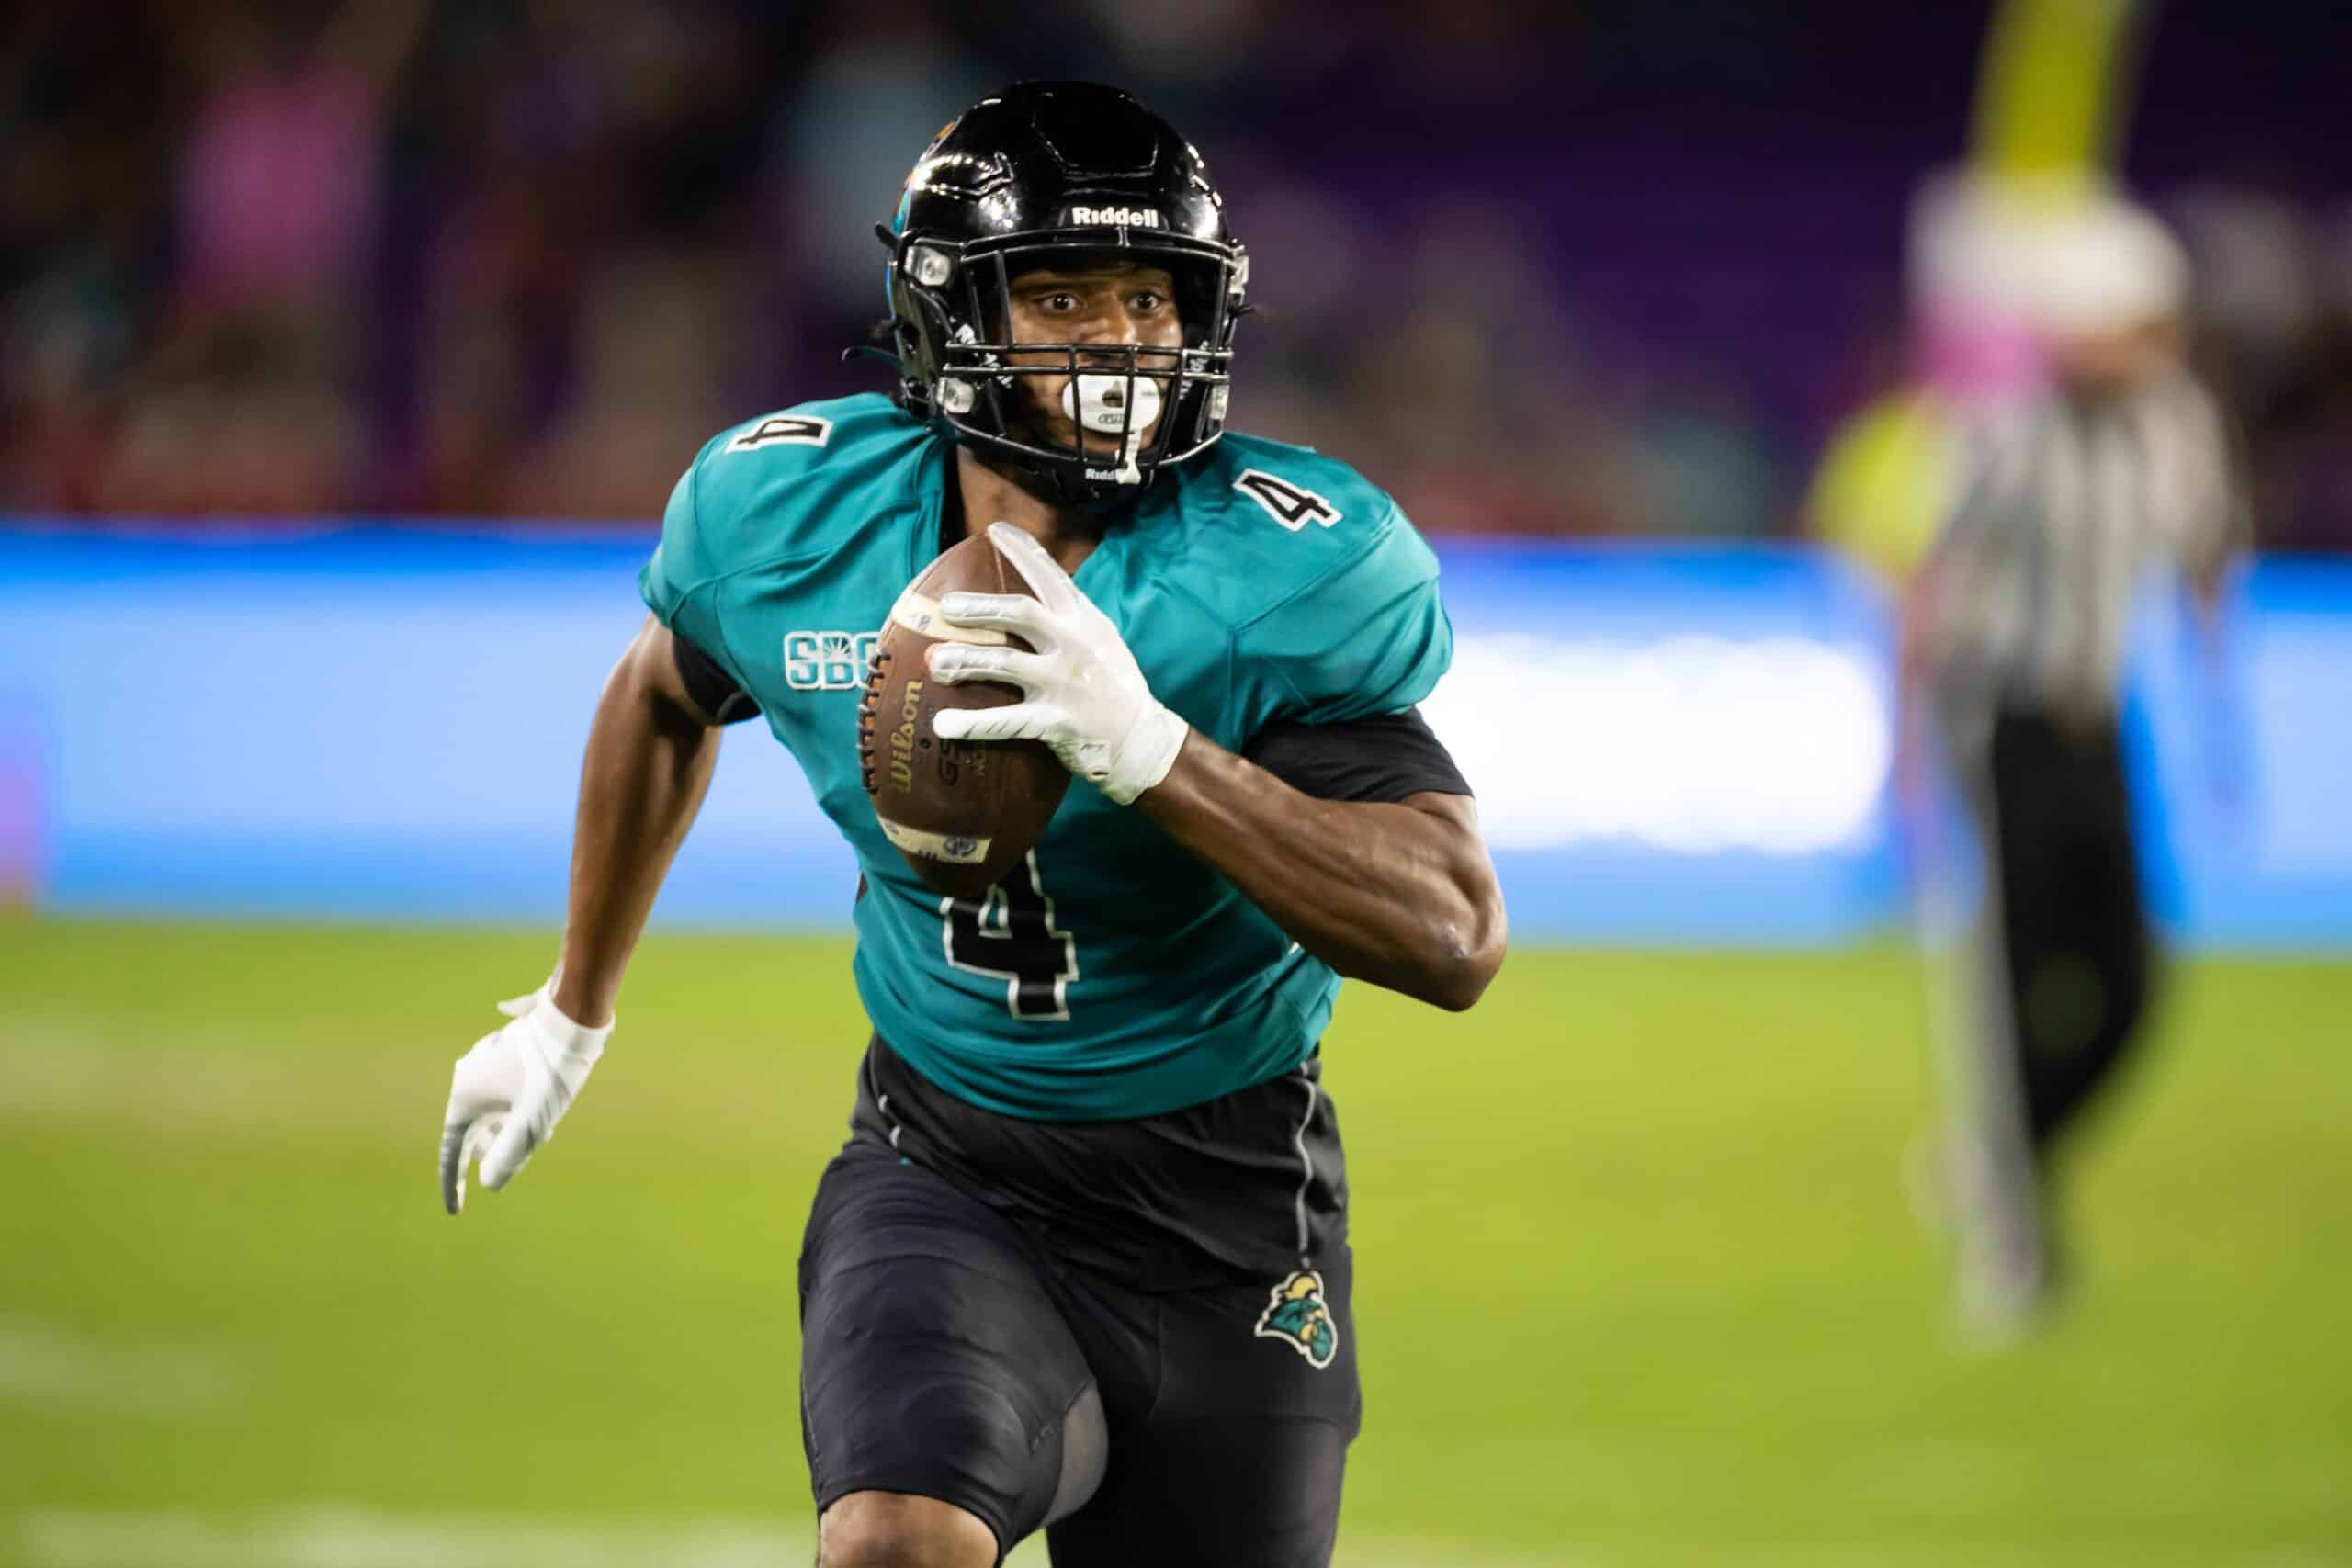 Isaiah Likely: 2022 Dynasty Rookie Profile - Yards Per Fantasy